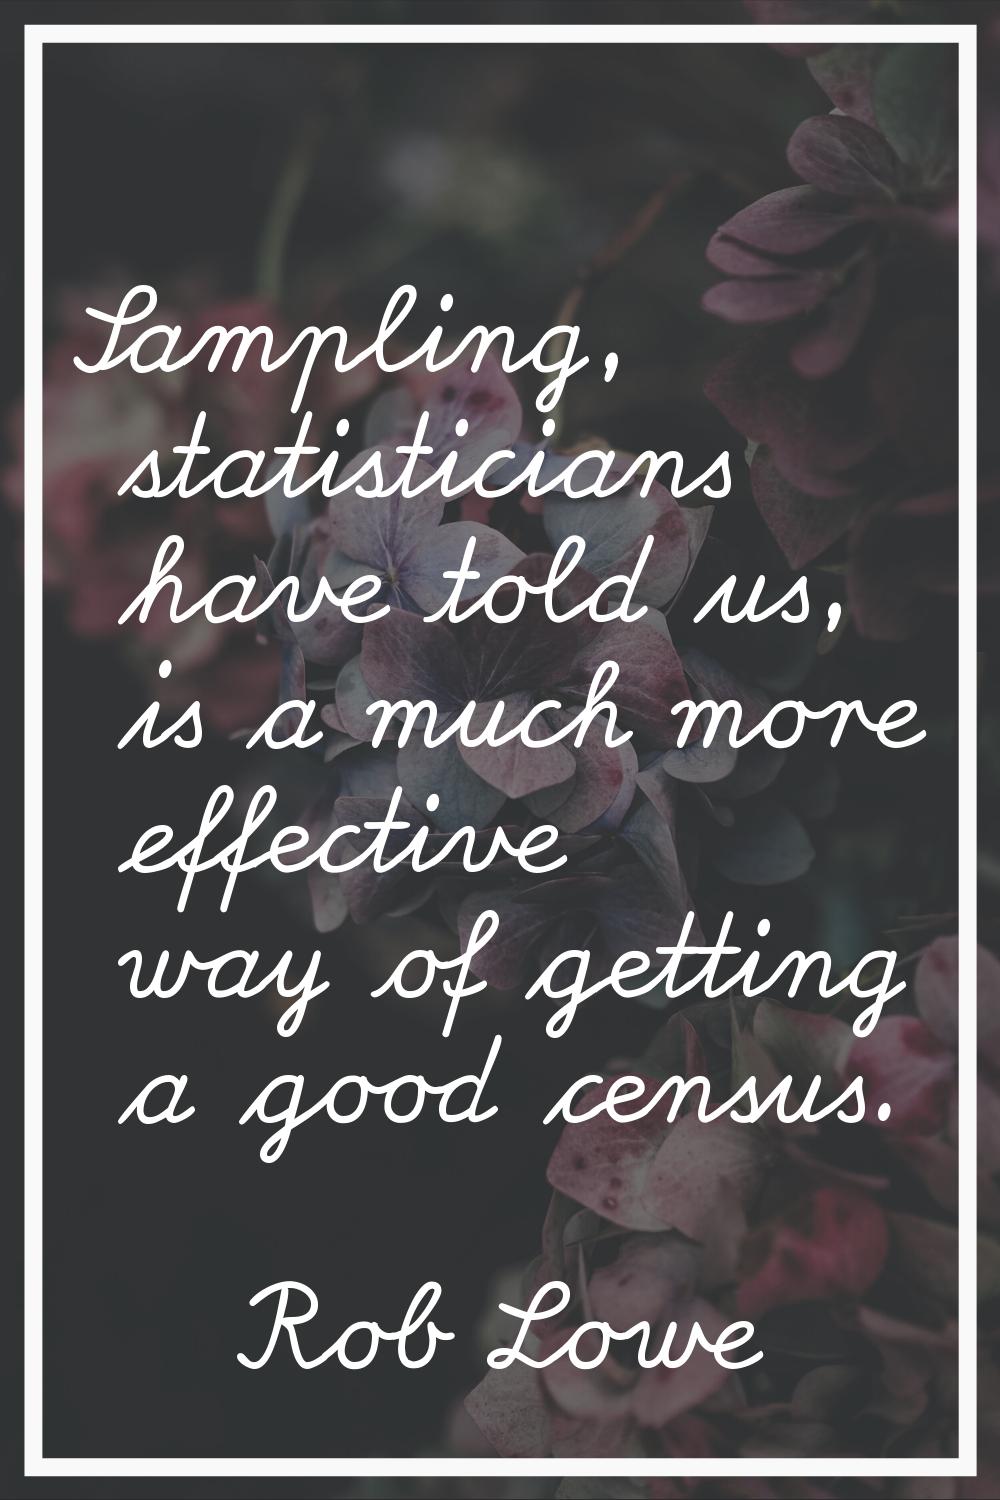 Sampling, statisticians have told us, is a much more effective way of getting a good census.